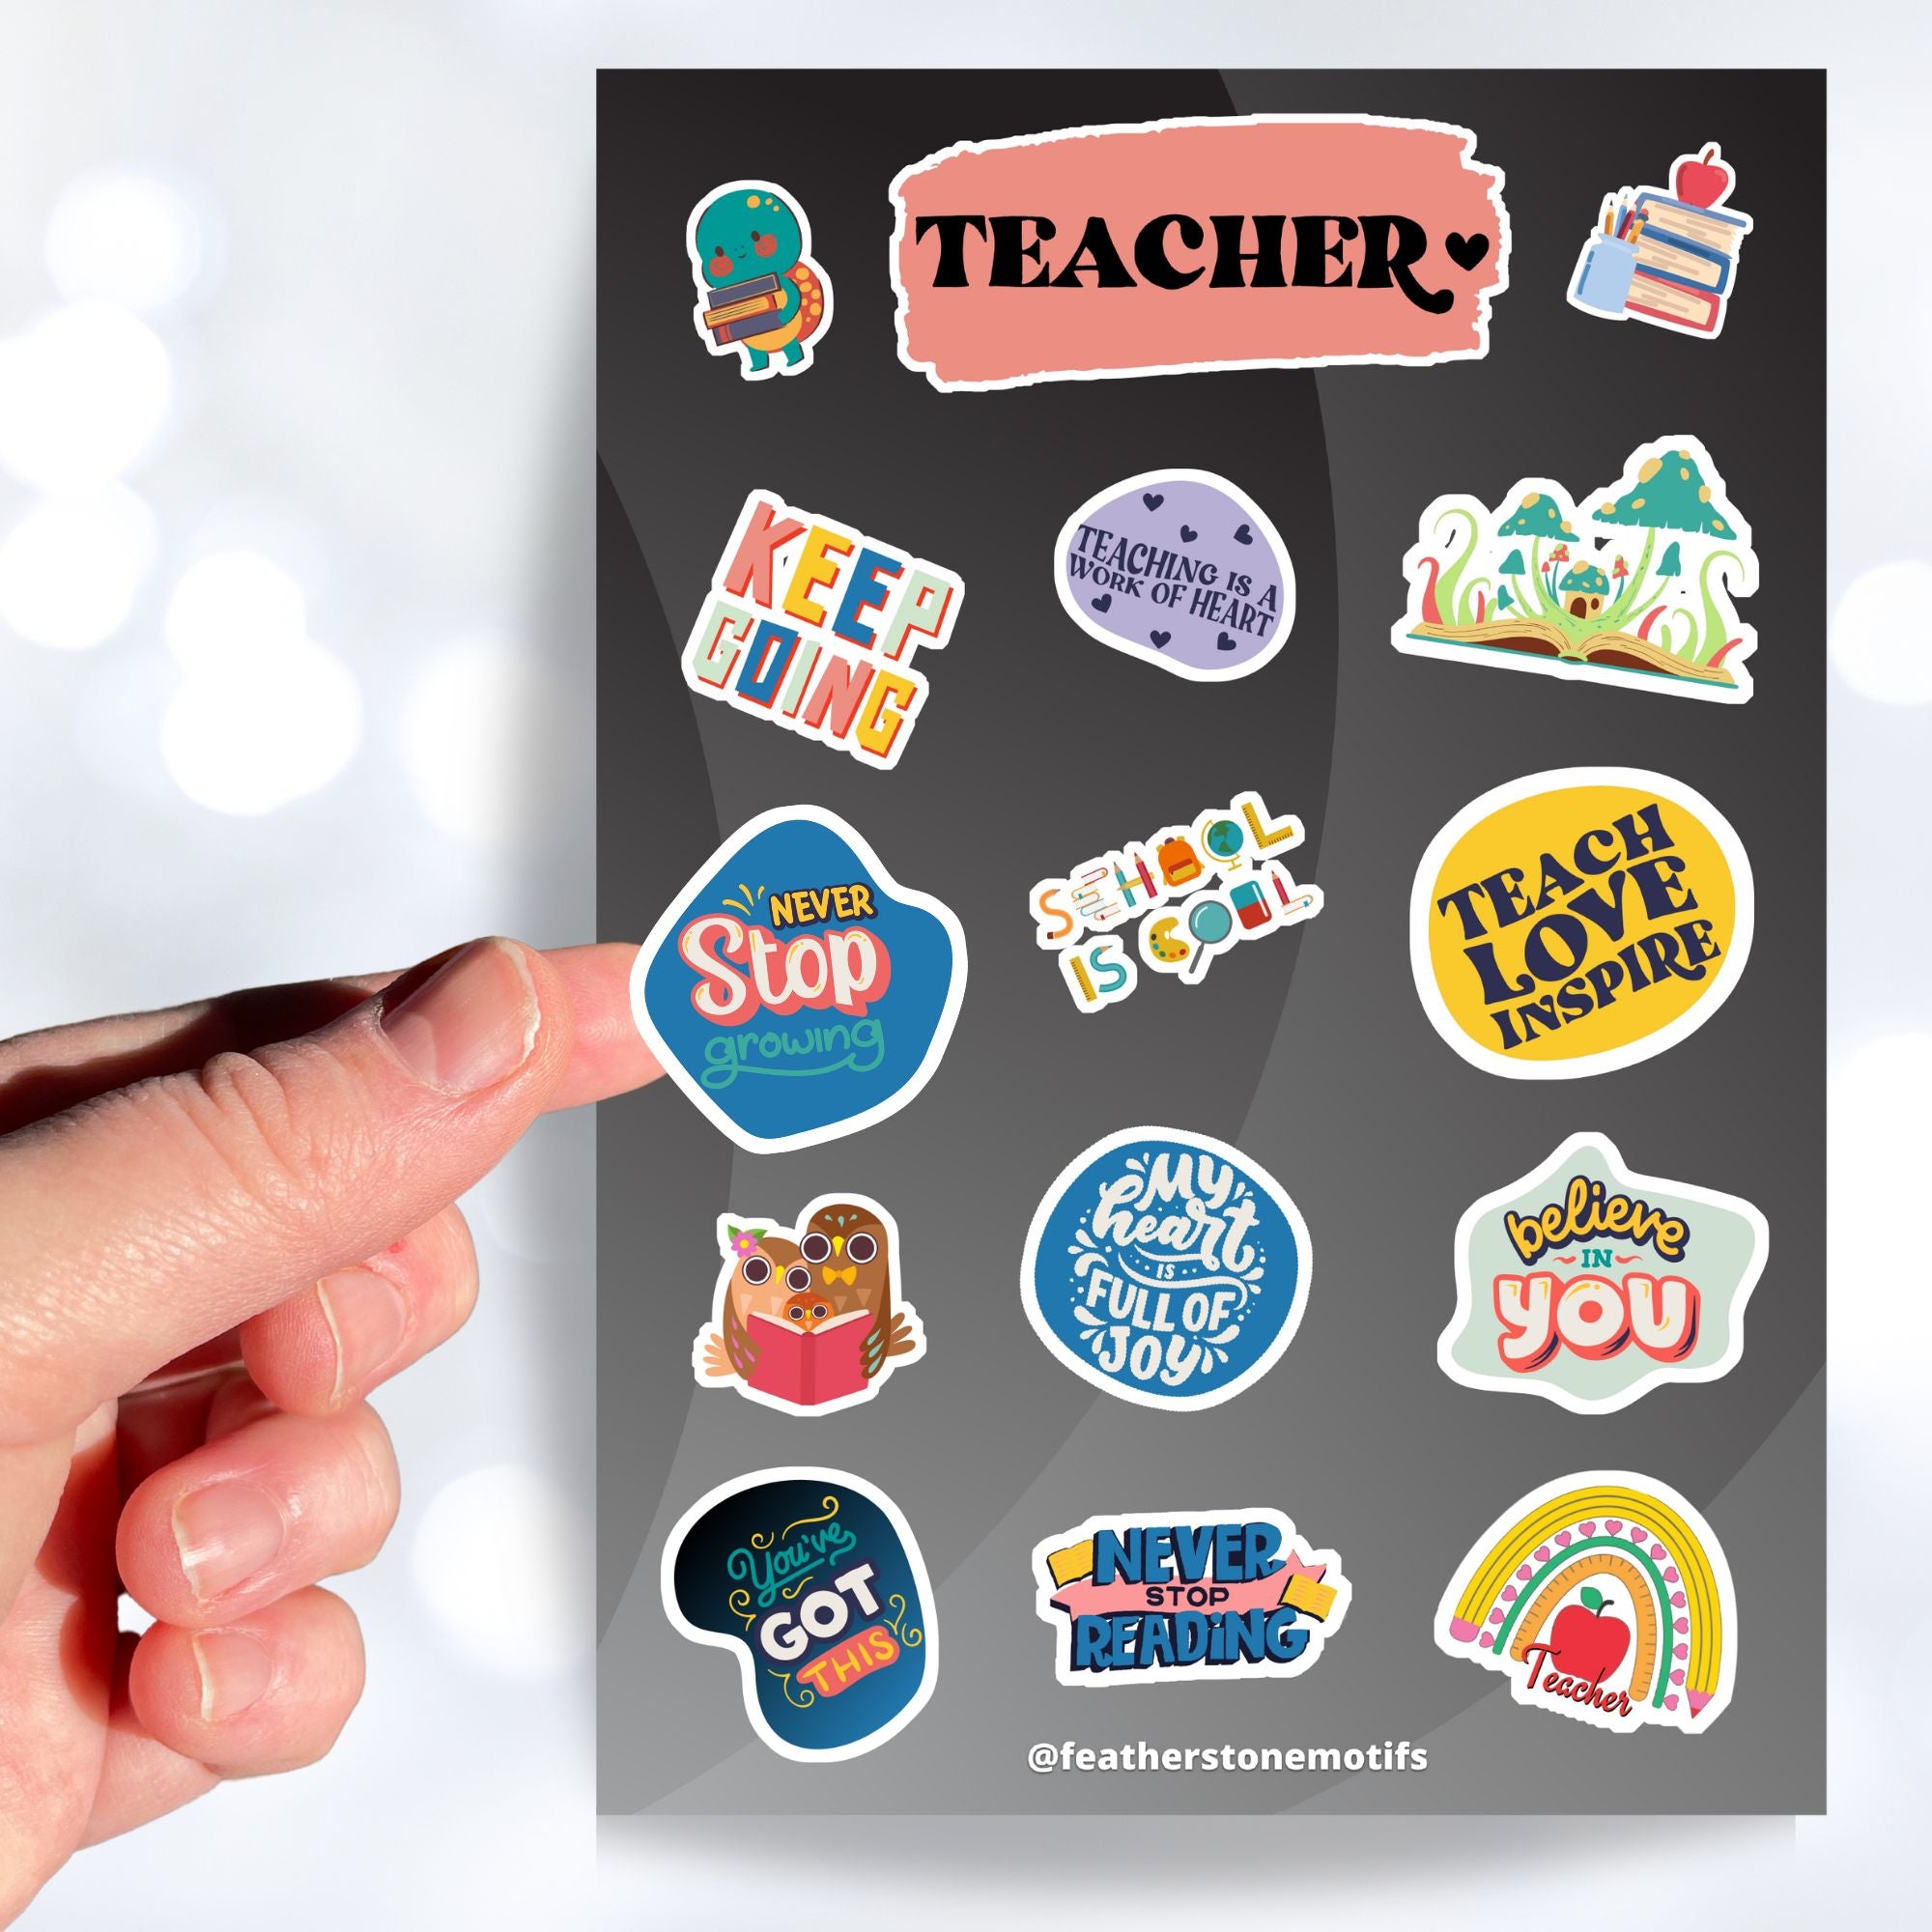 This sticker sheet is great for educators to give to students, or for students to give as a gift to their teacher/educator! The sticker sheet is filled with sticker images like books, and inspirational sayings like "Keep Going", "Never Stop Reading", and "School is Cool". This image shows a hand holding a sticker saying "Never Stop growing" above the sticker sheet.